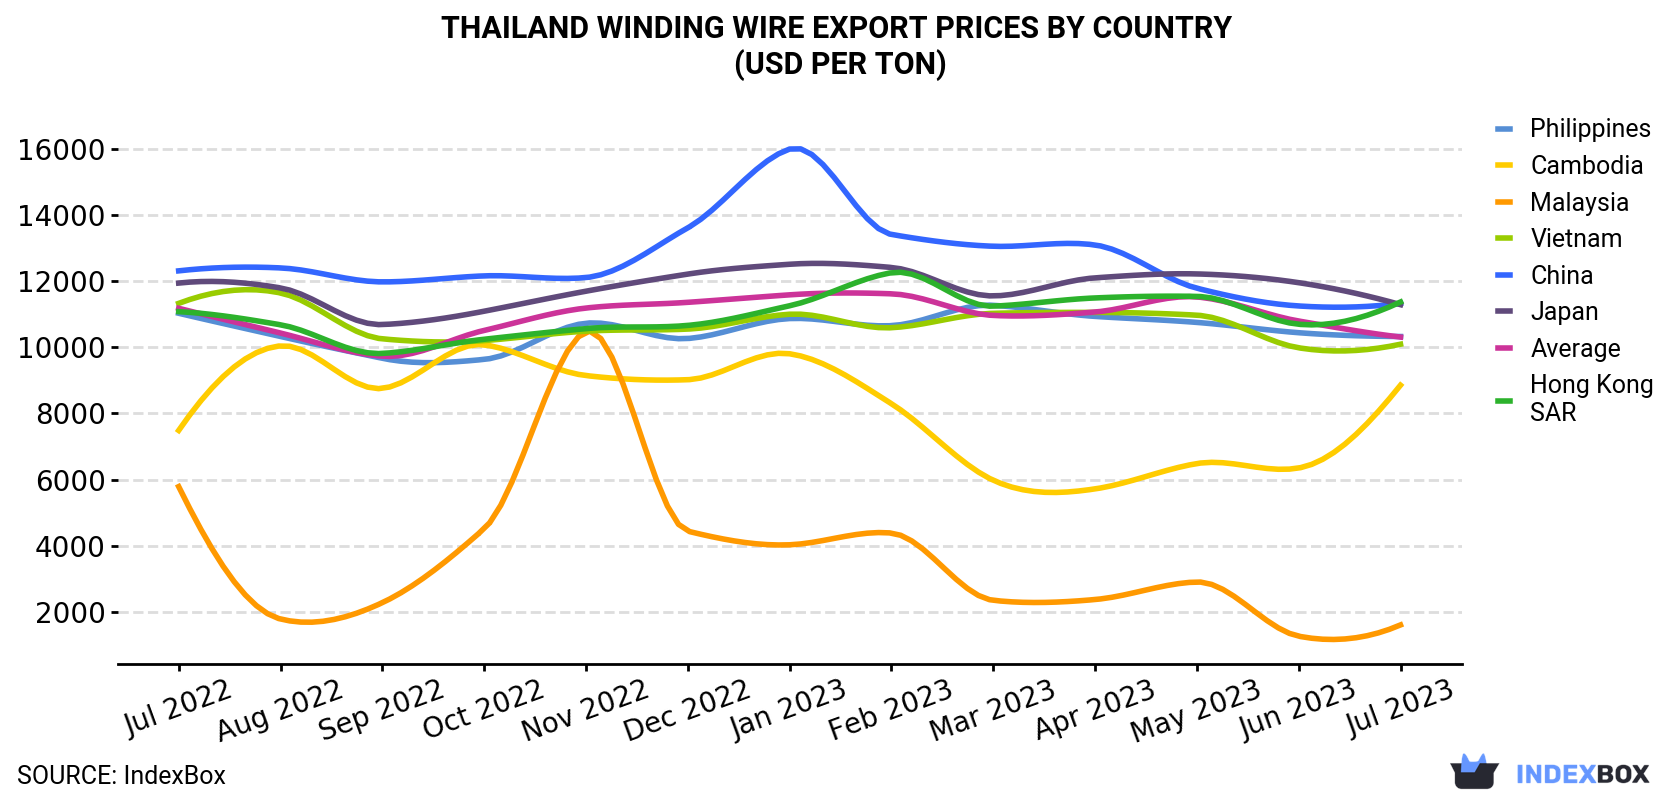 Thailand Winding Wire Export Prices By Country (USD Per Ton)